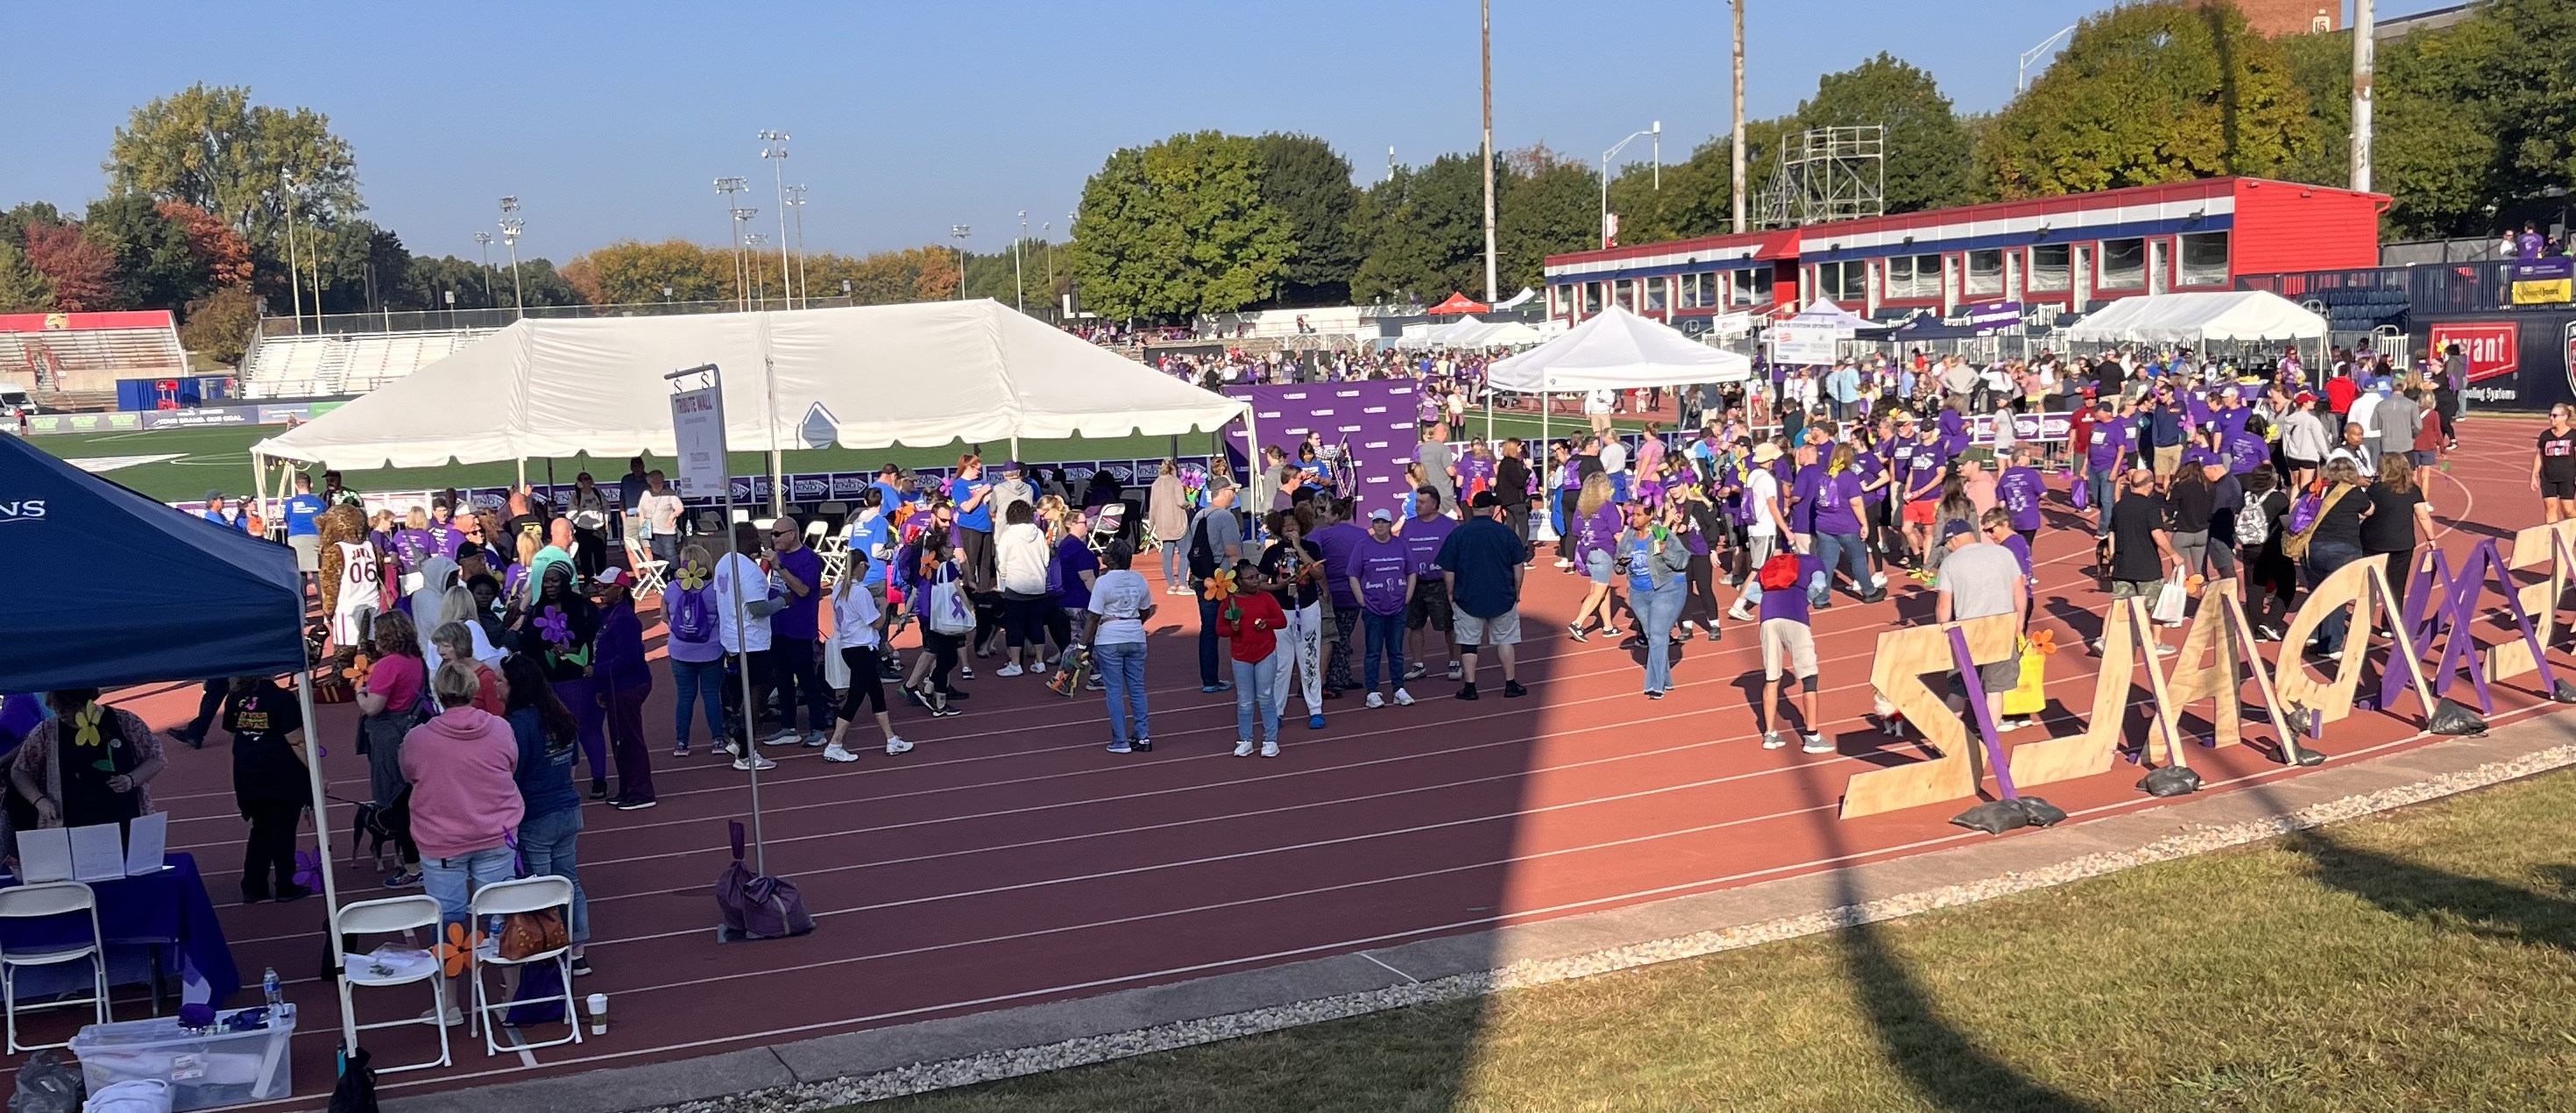 Walk to End Alzheimer's in North Indianapolis, IN